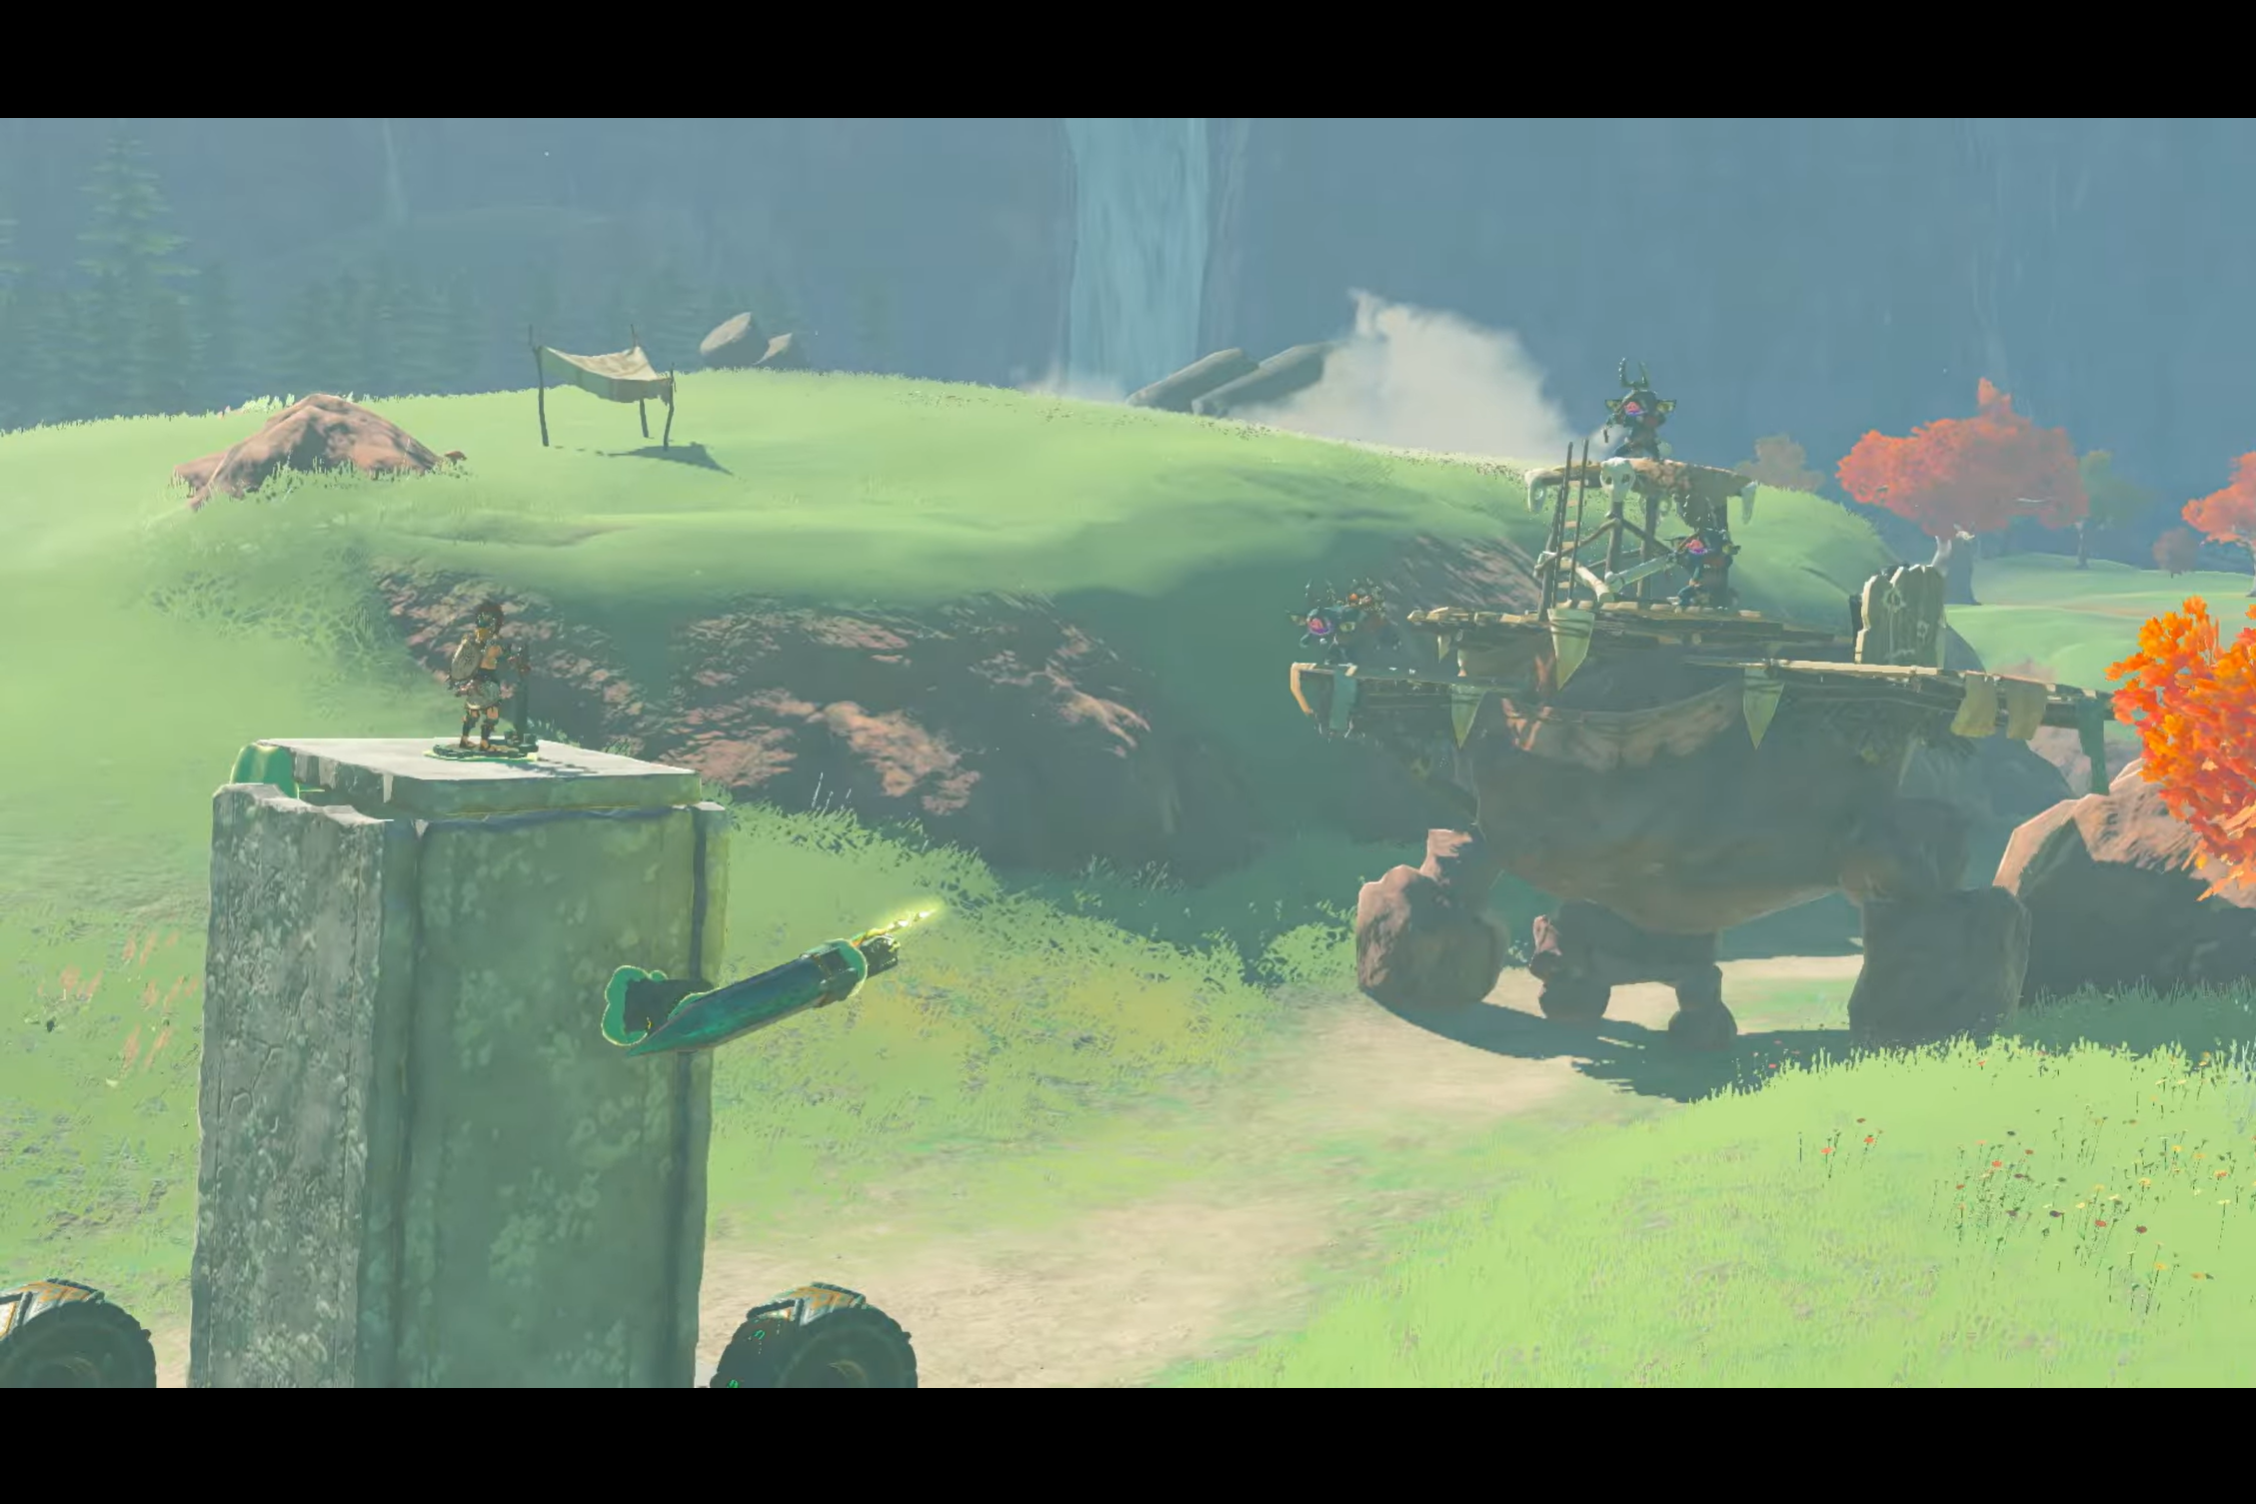 Link commands a janky vehicle made out of a few blocks of stone, fighting Bokoblins riding a stone Talus in The Legend of Zelda: Tears of the Kingdom.